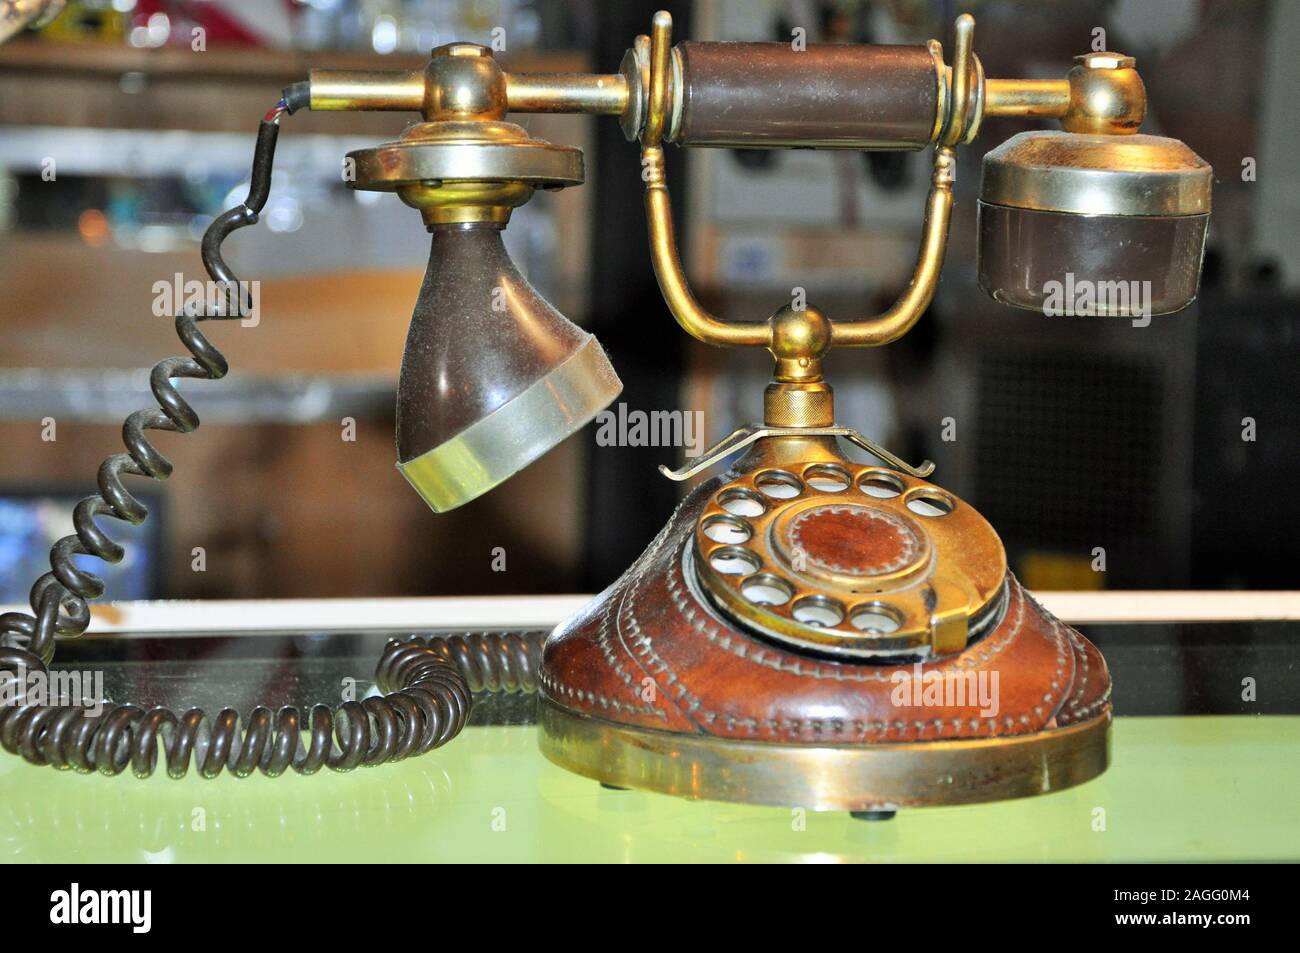 A corroded brown retro dial phone on a warm golden colored wooden deck. Stock Photo